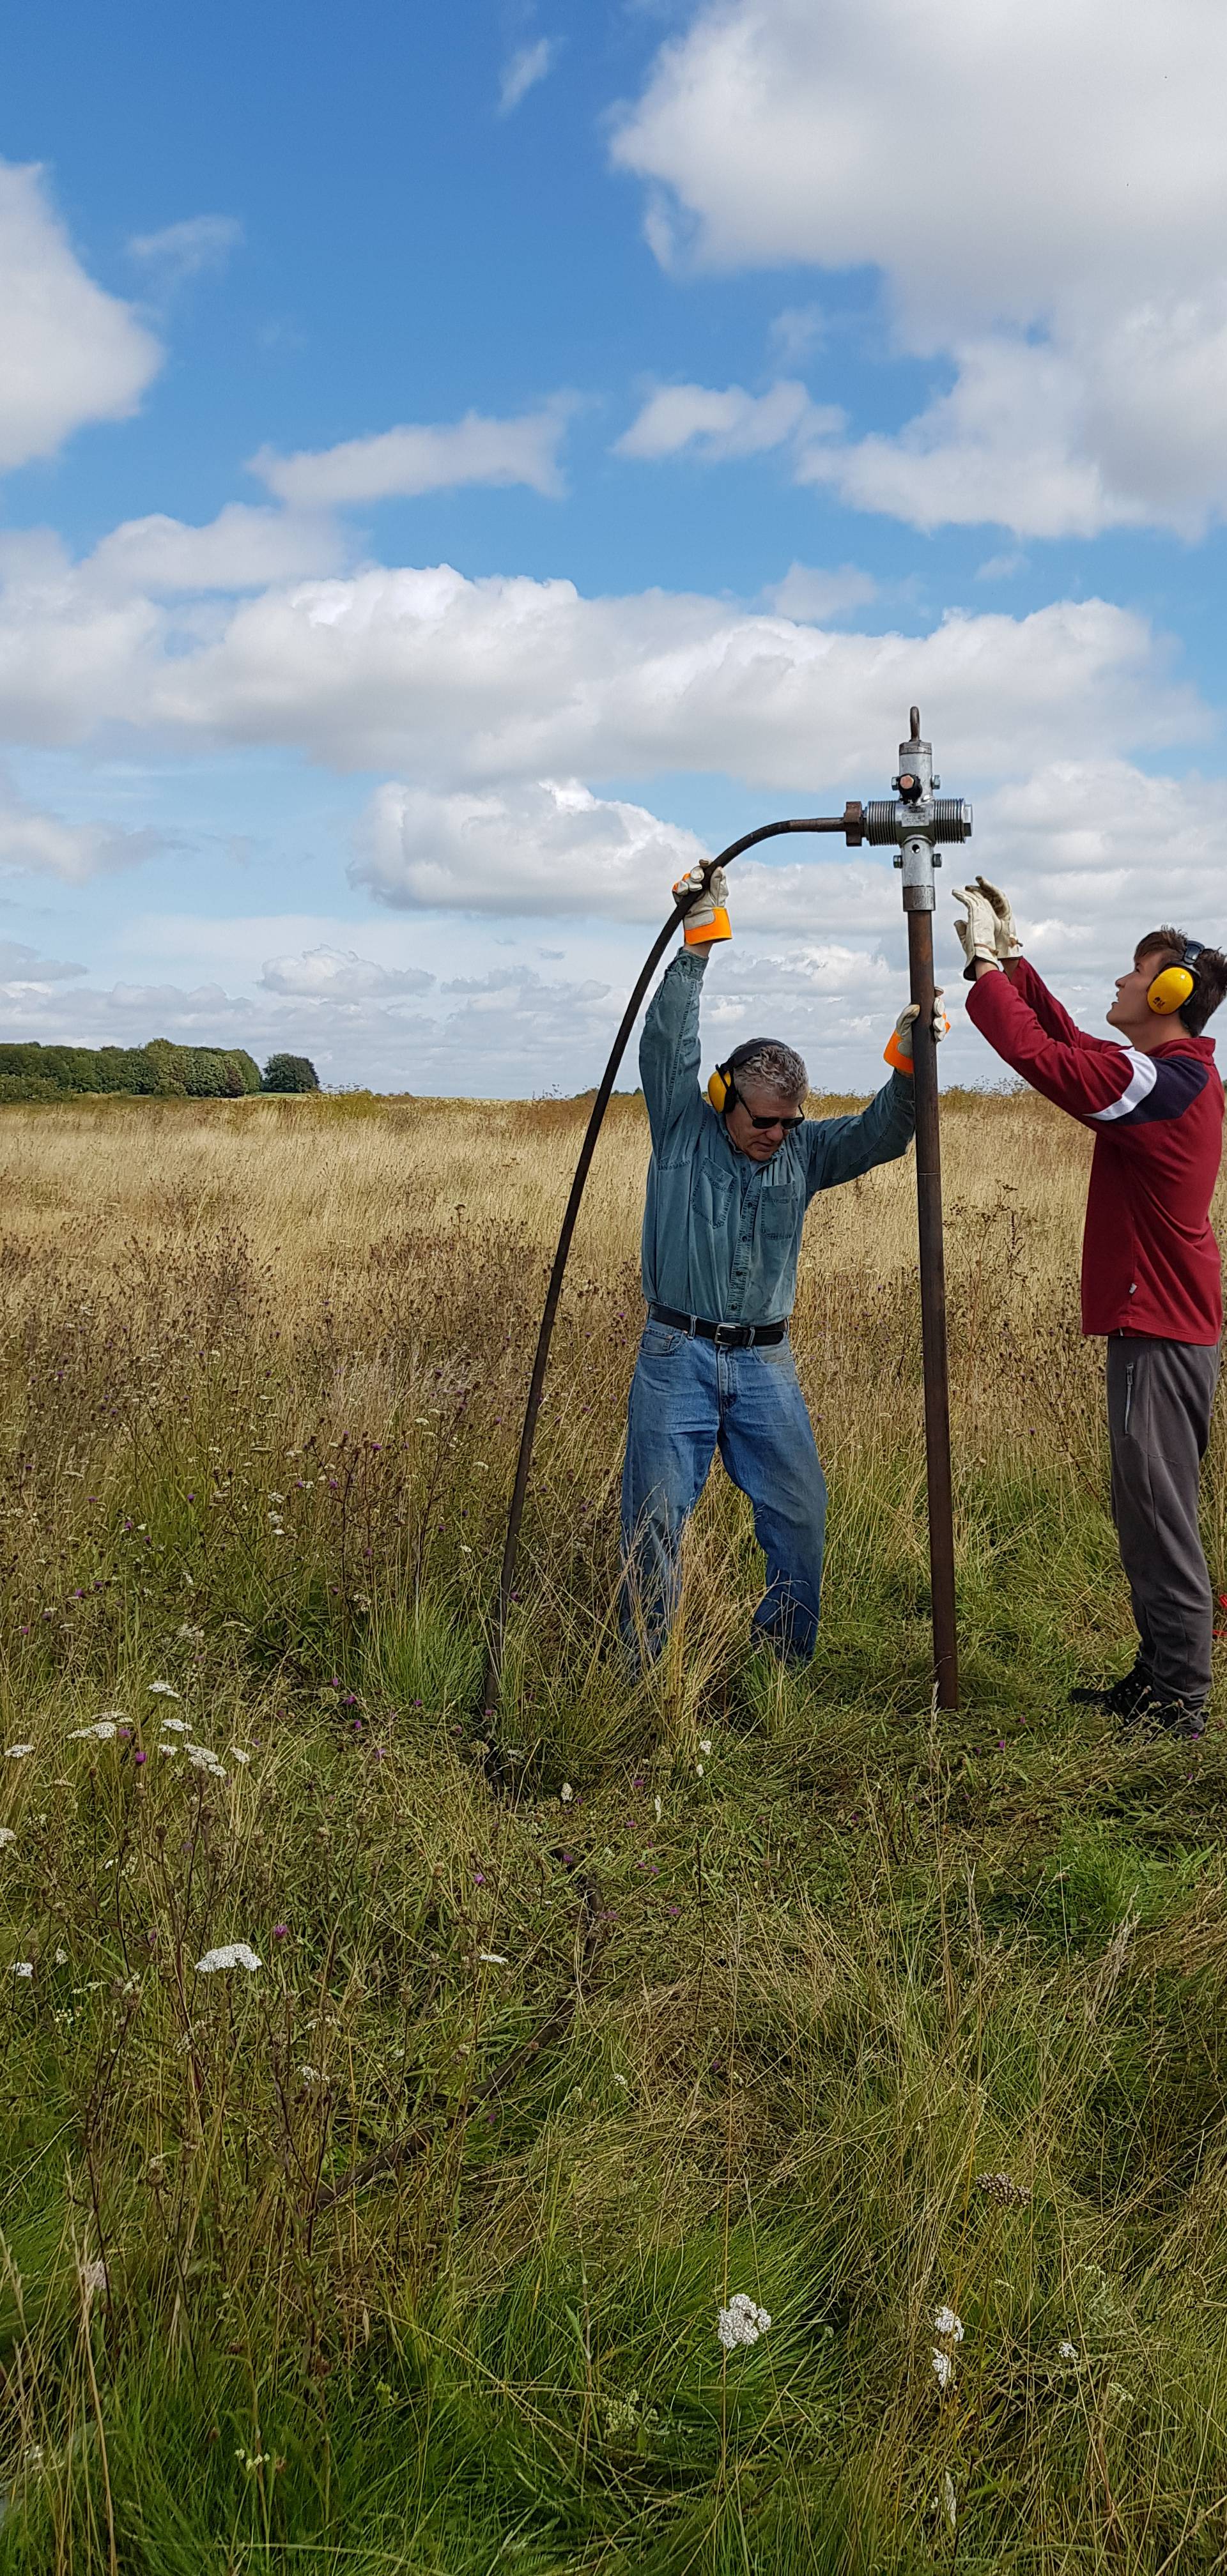 Members of the consortium which made the discovery of a wide circle of deep pits, as part of the Stonehenge Hidden Landscapes Project, conduct fieldwork in Durrington, Wiltshire